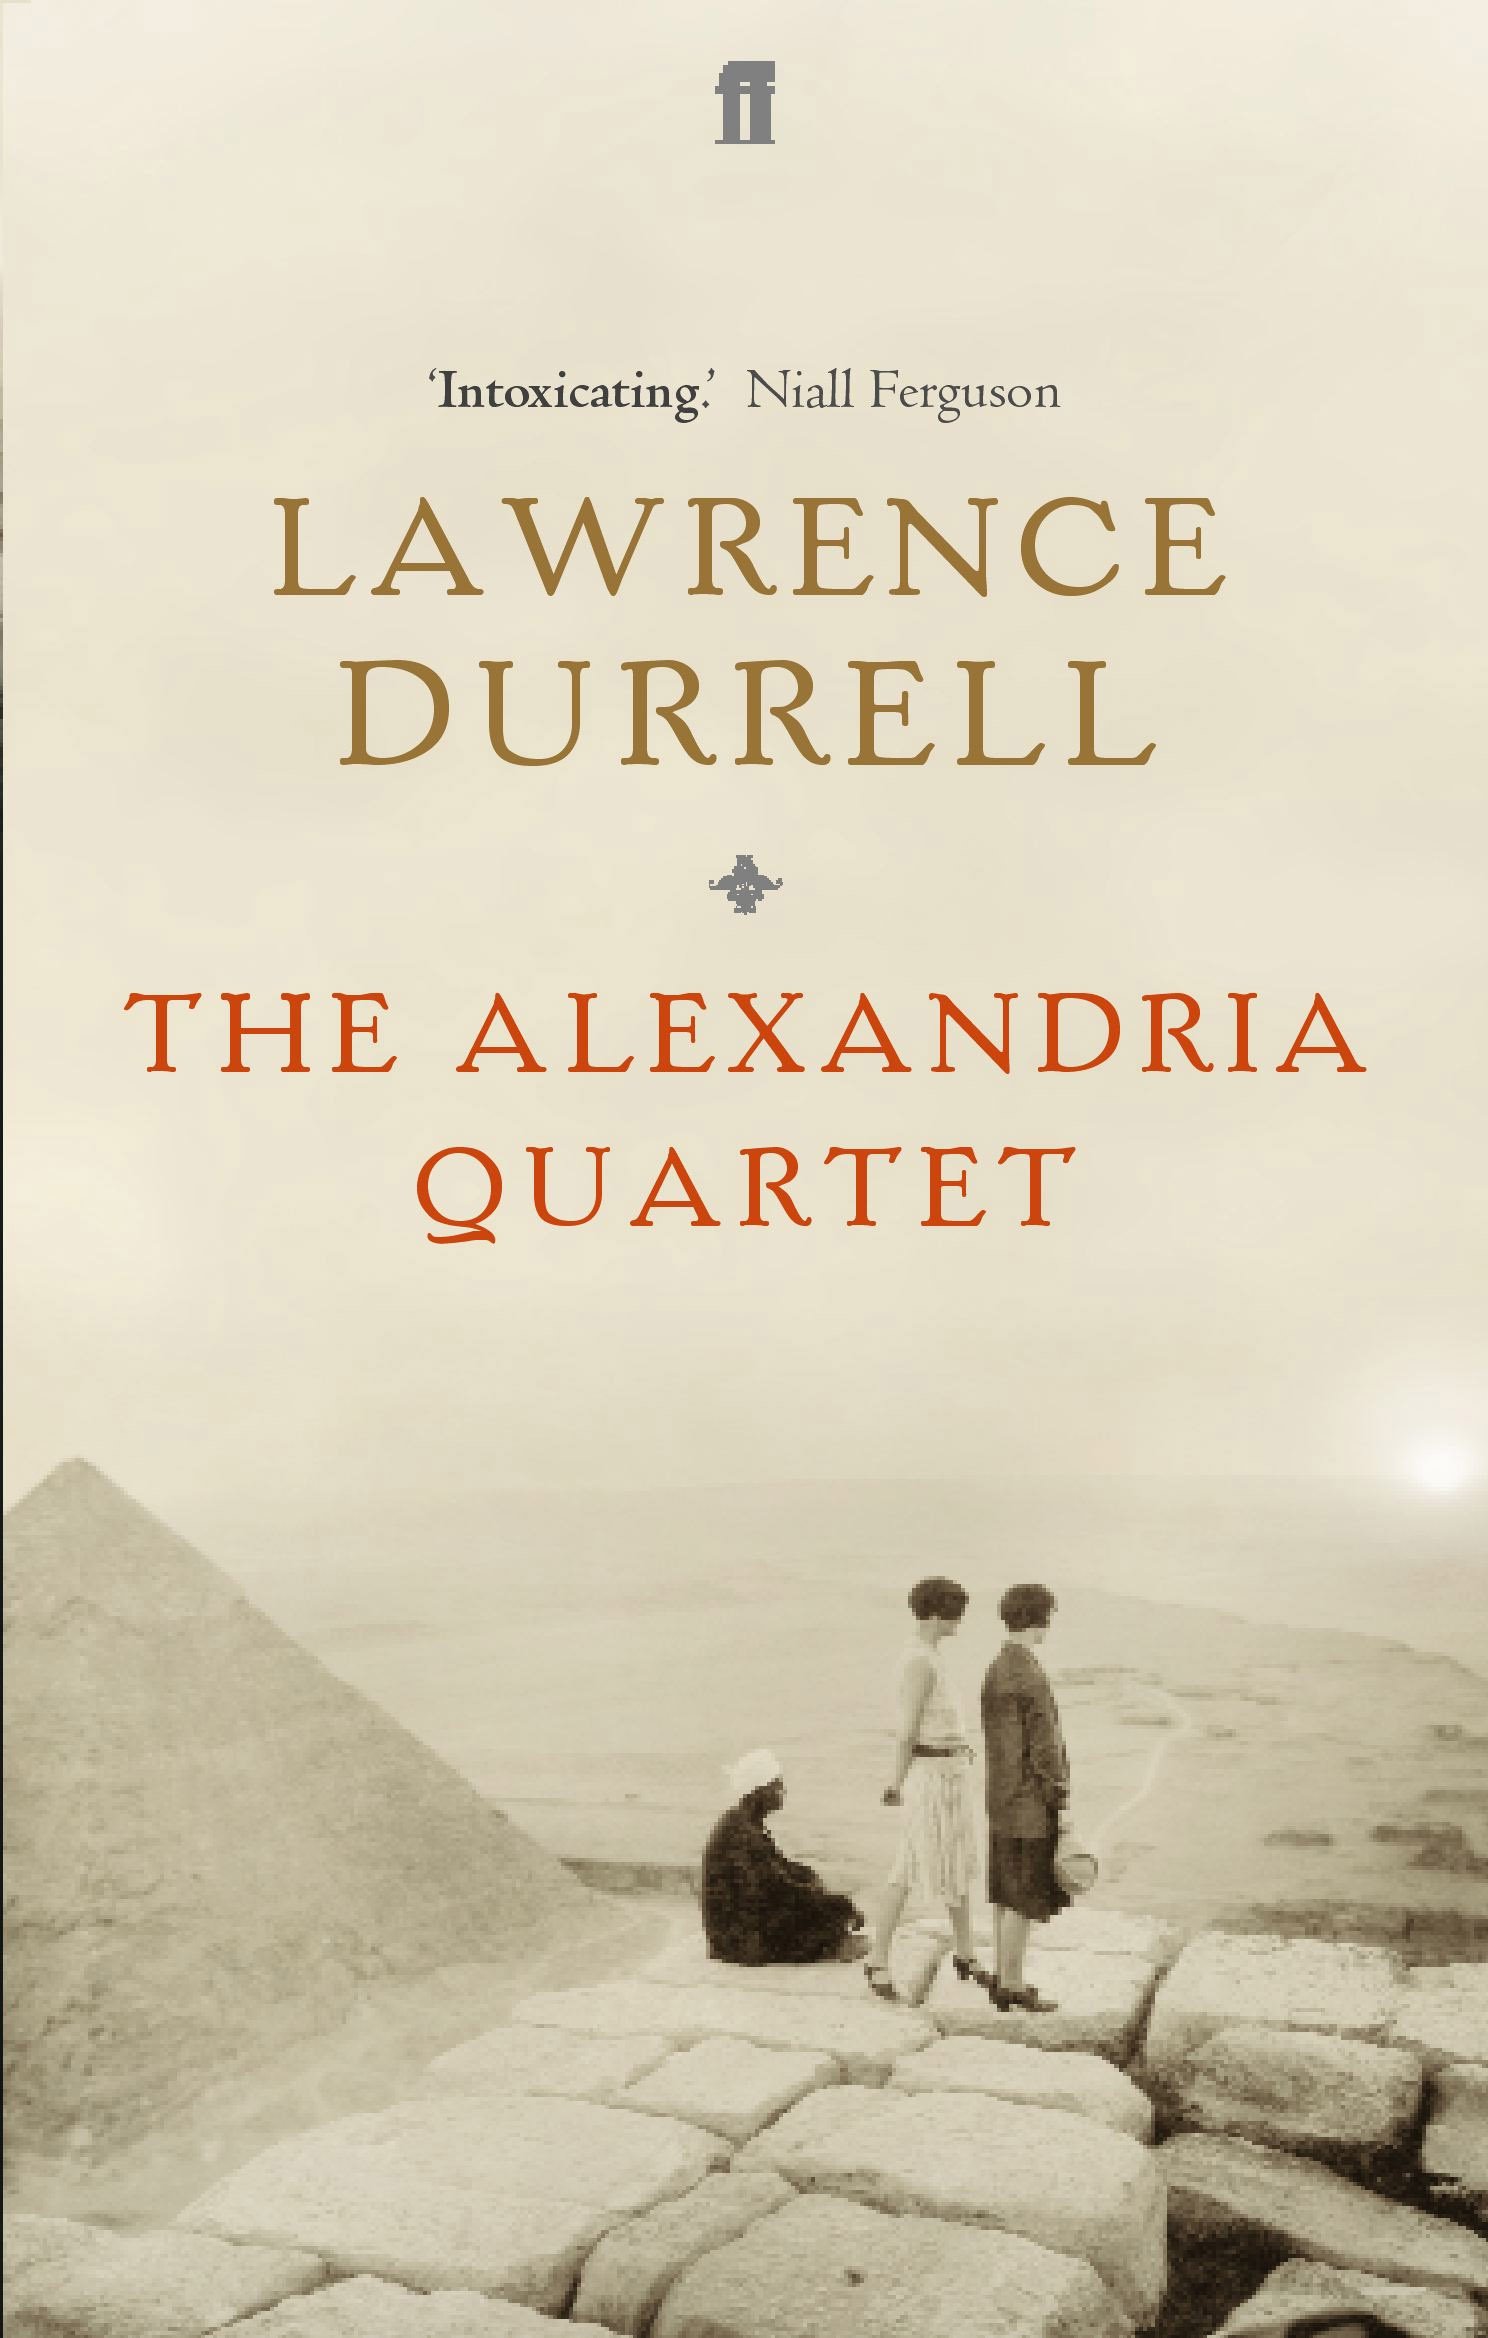 The Alexandria Quartet is a tetralogy of novels by British writer Lawrence Durrell, published between 1957 and 1960.